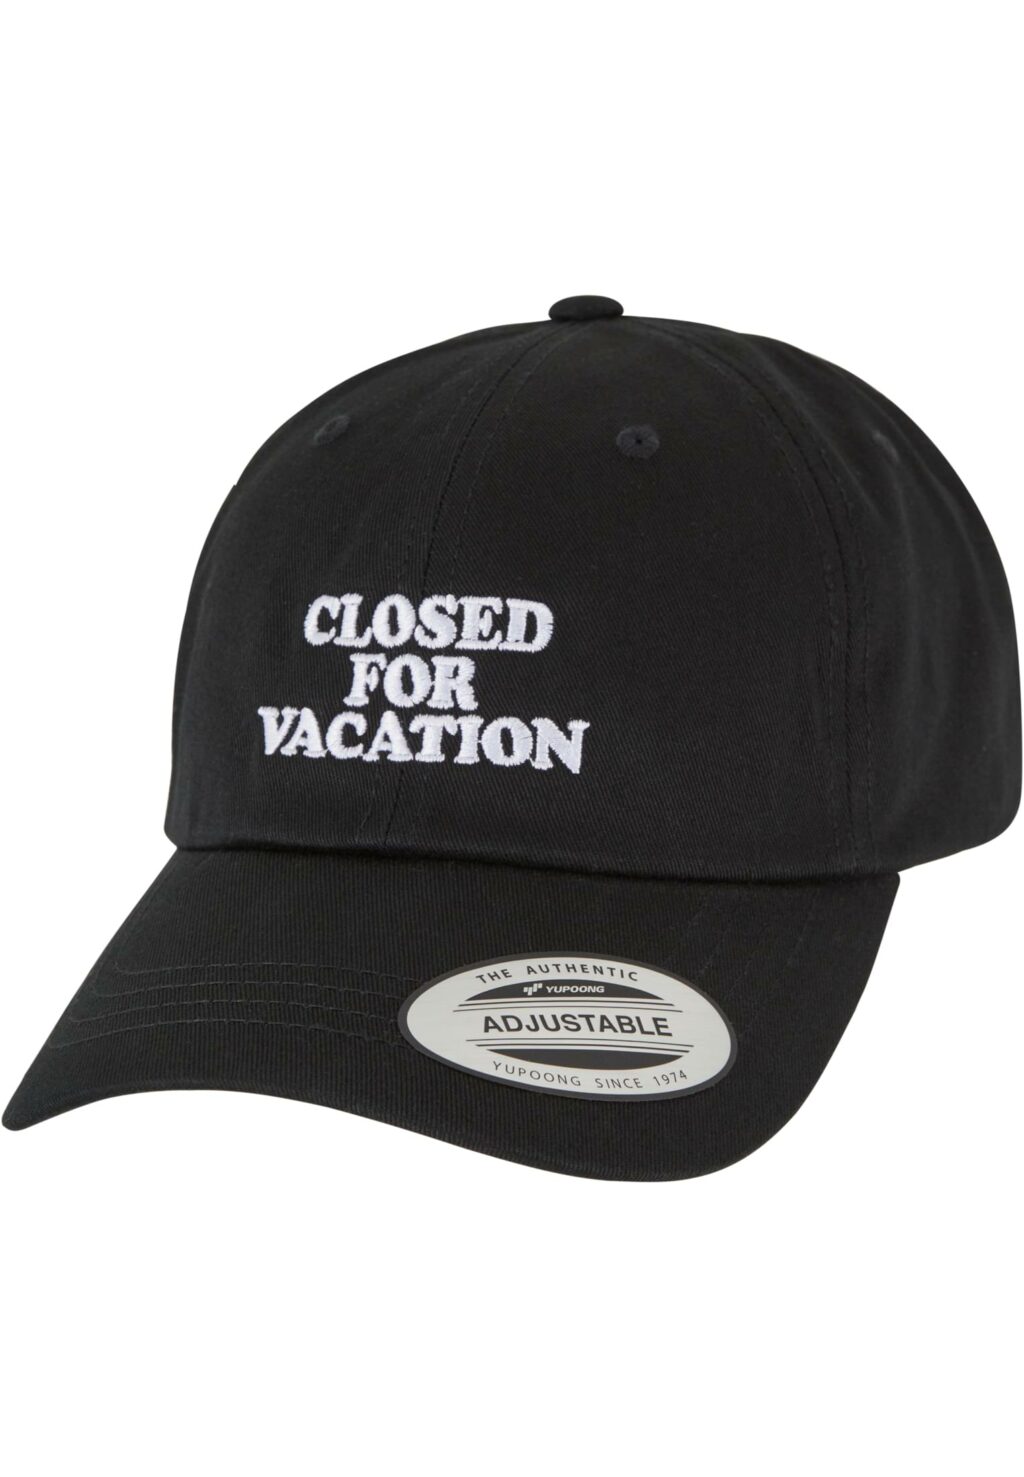 Closed For Vacation Dad Cap black one MT2835